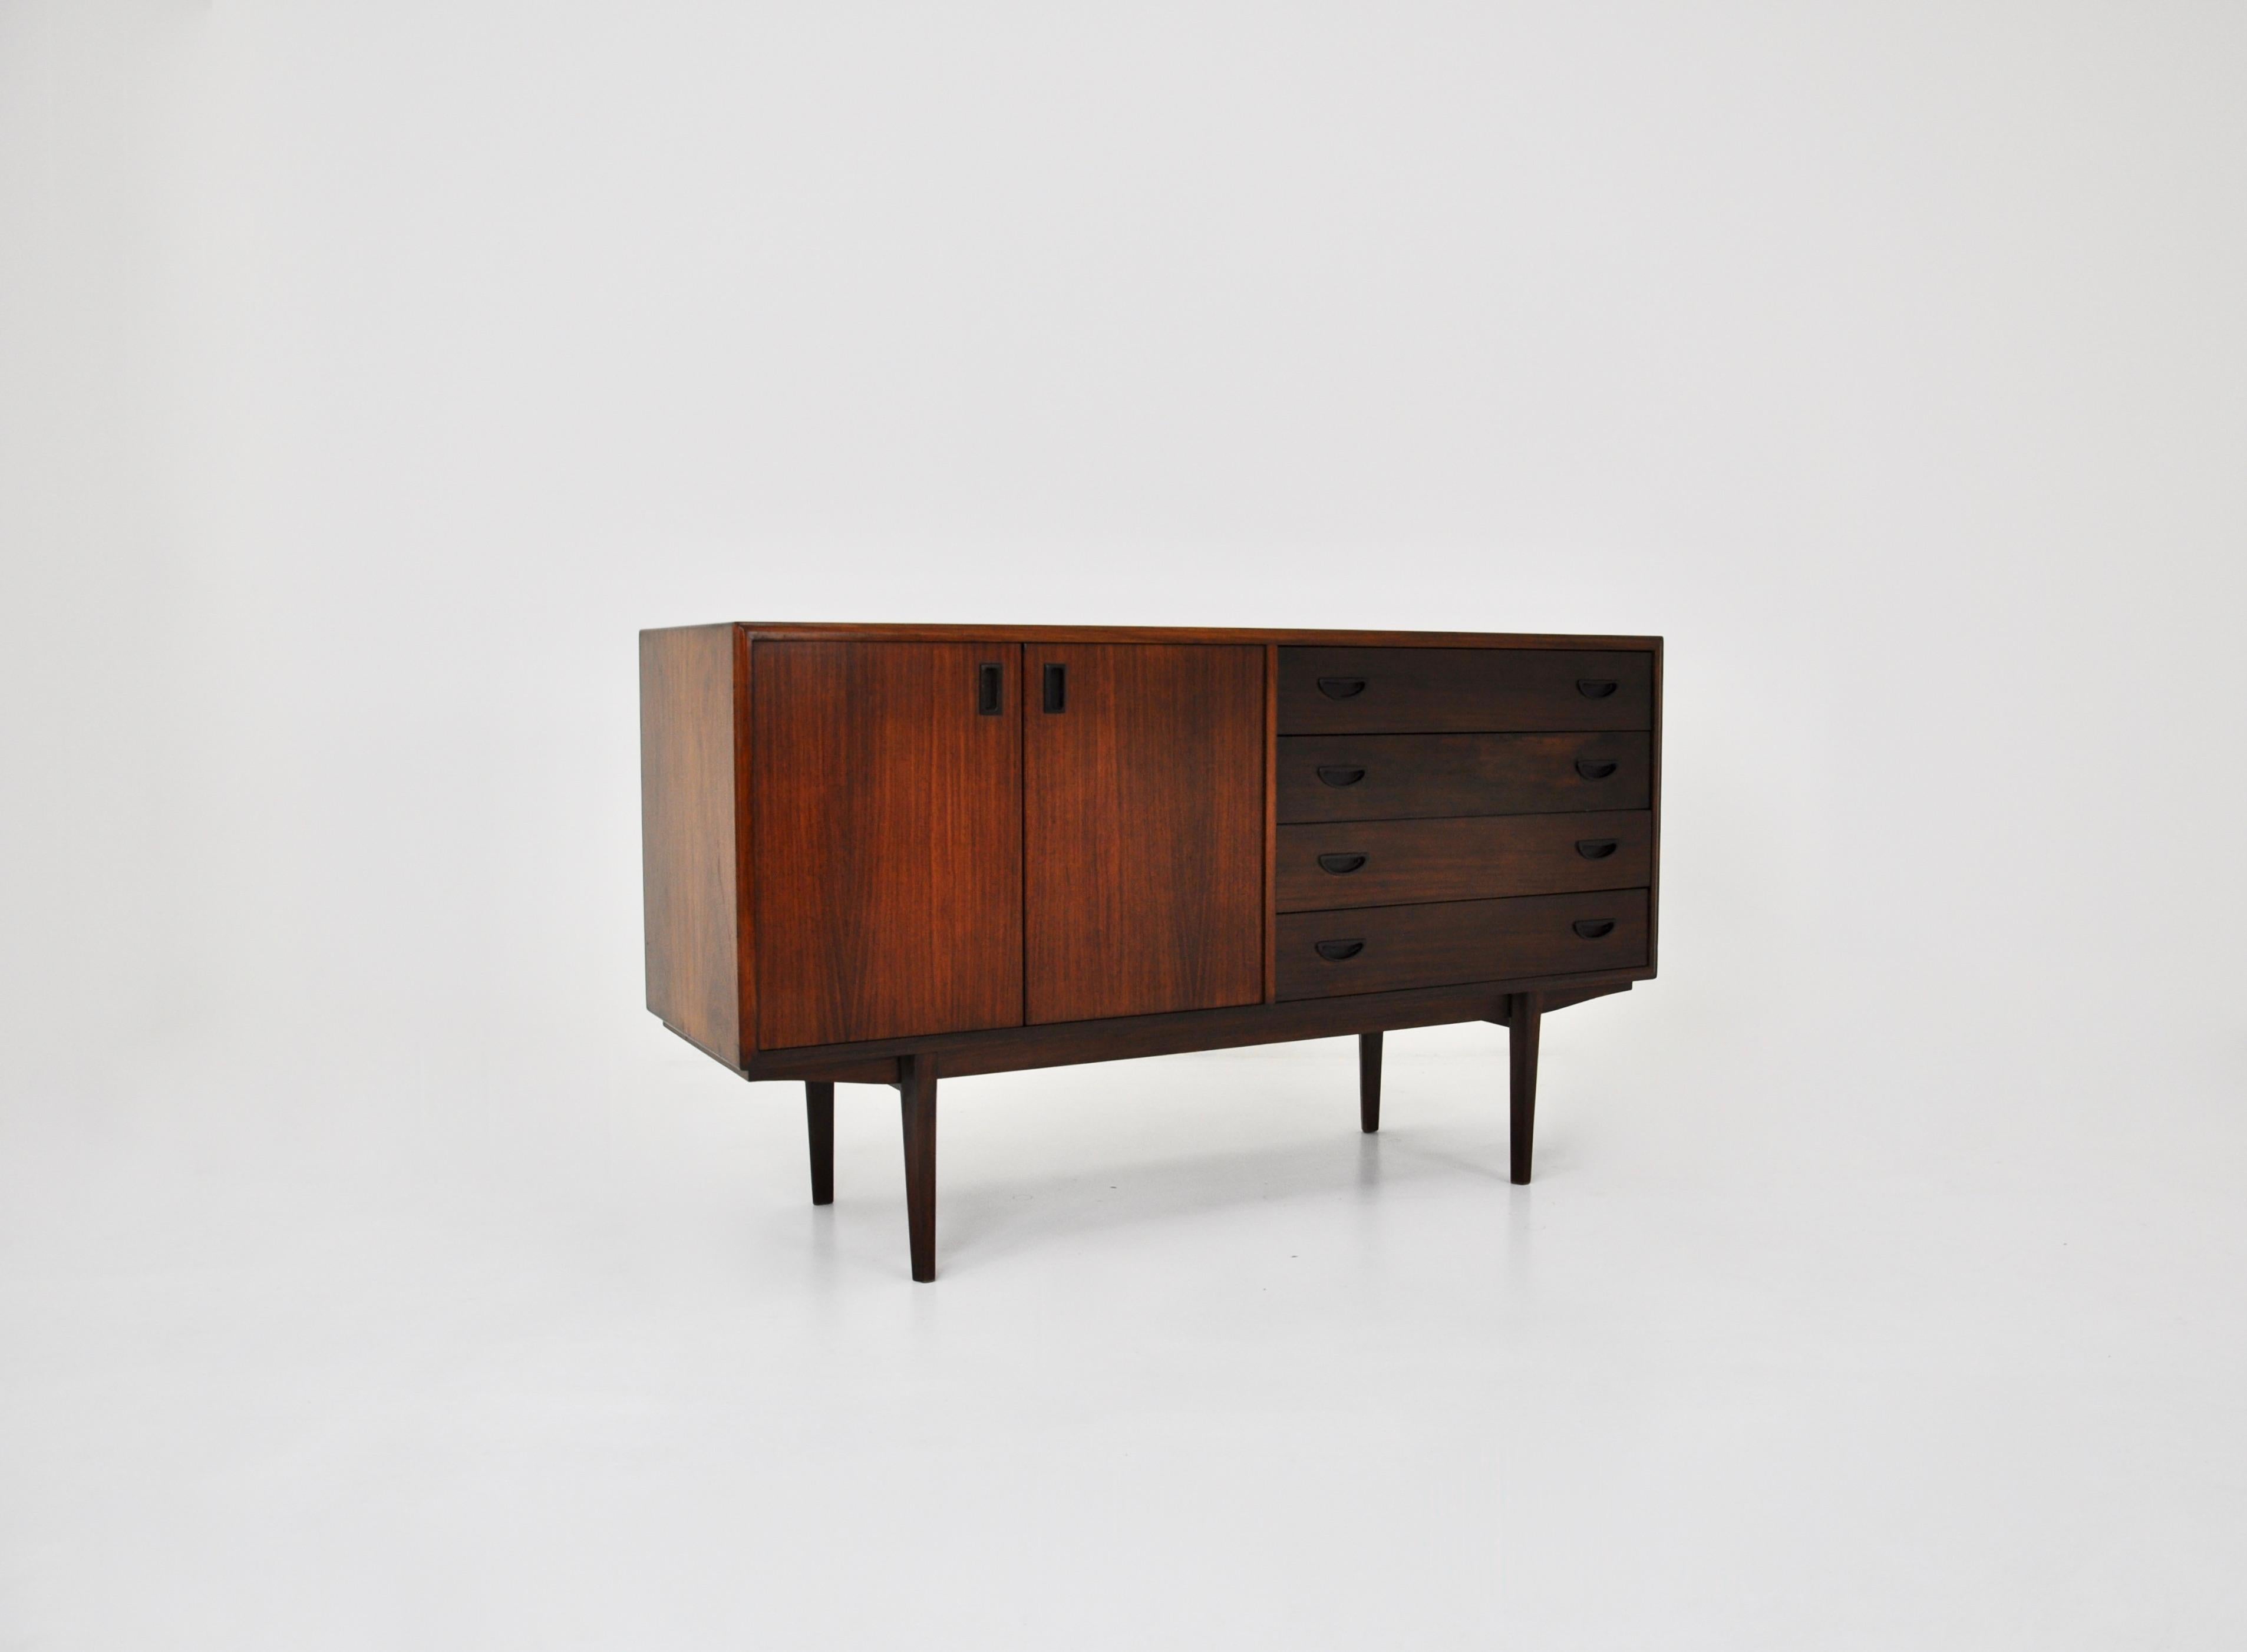 Italian wooden sideboard. It has 4 drawers and a double door with a shelf. Wear due to time and age of the sideboard.